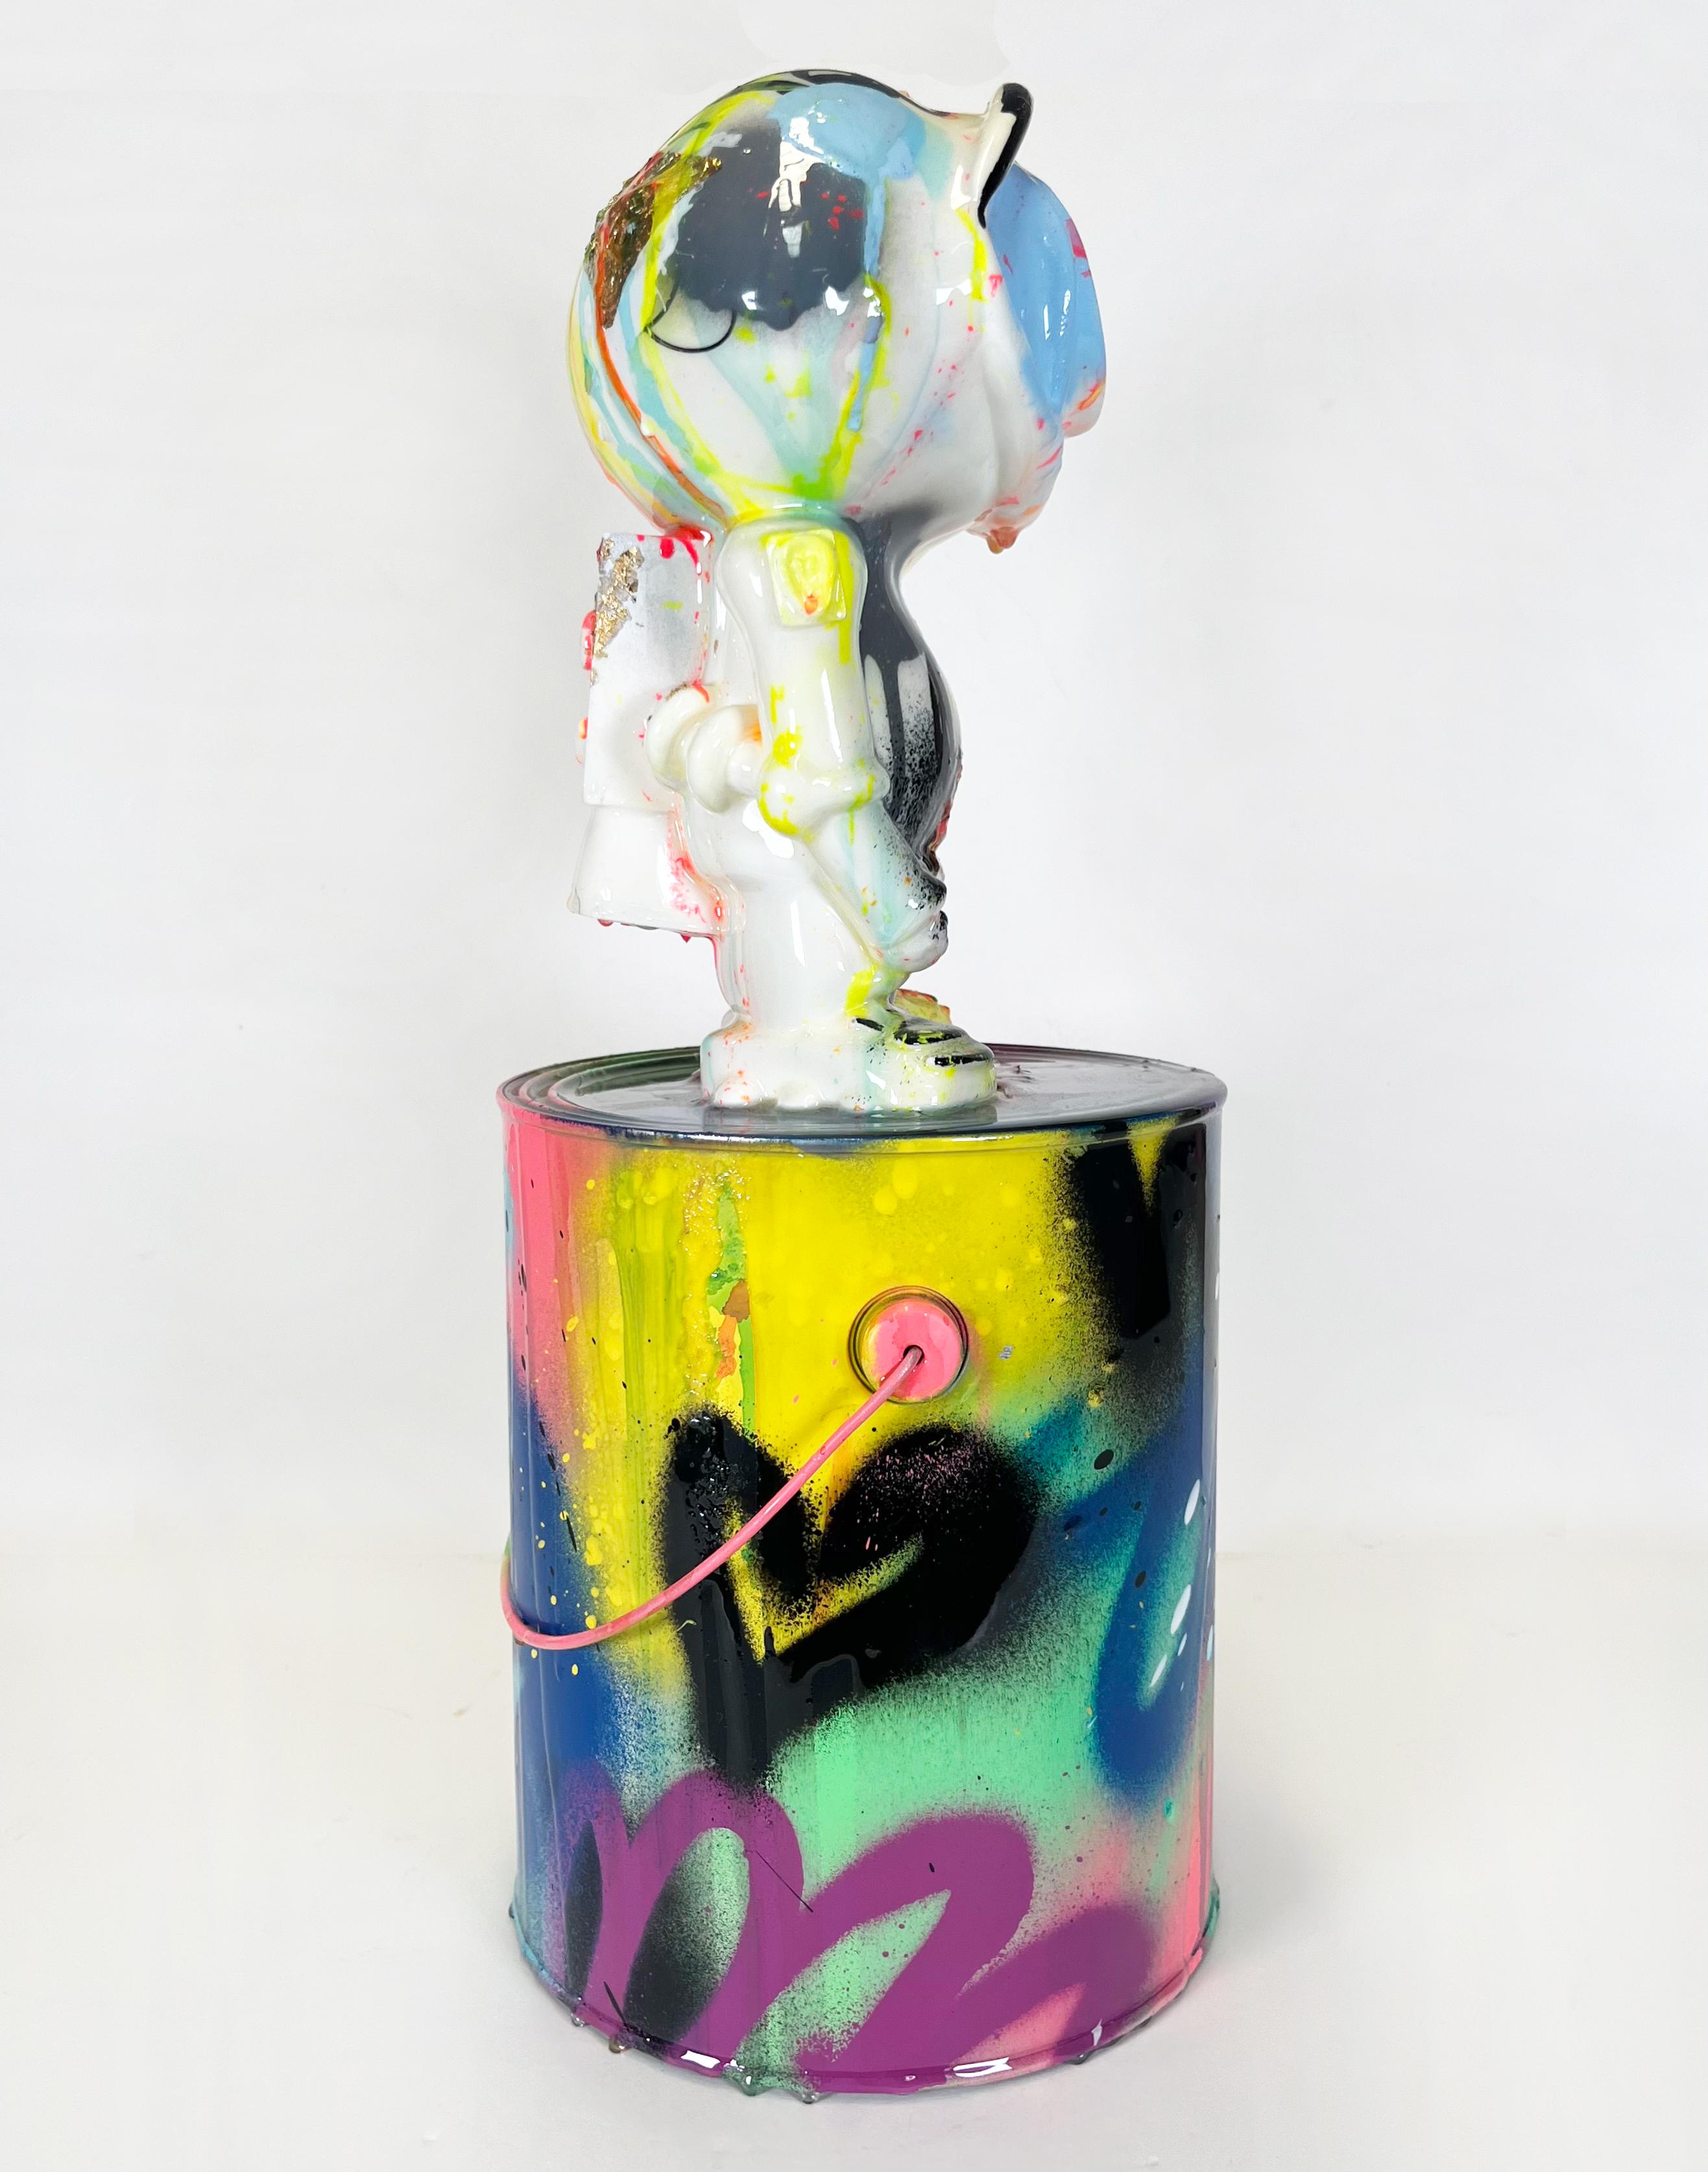 Technicolour Xeno Paint Can v2, colorful and cool resin cast figure sculpture - Sculpture by Chris Solcz